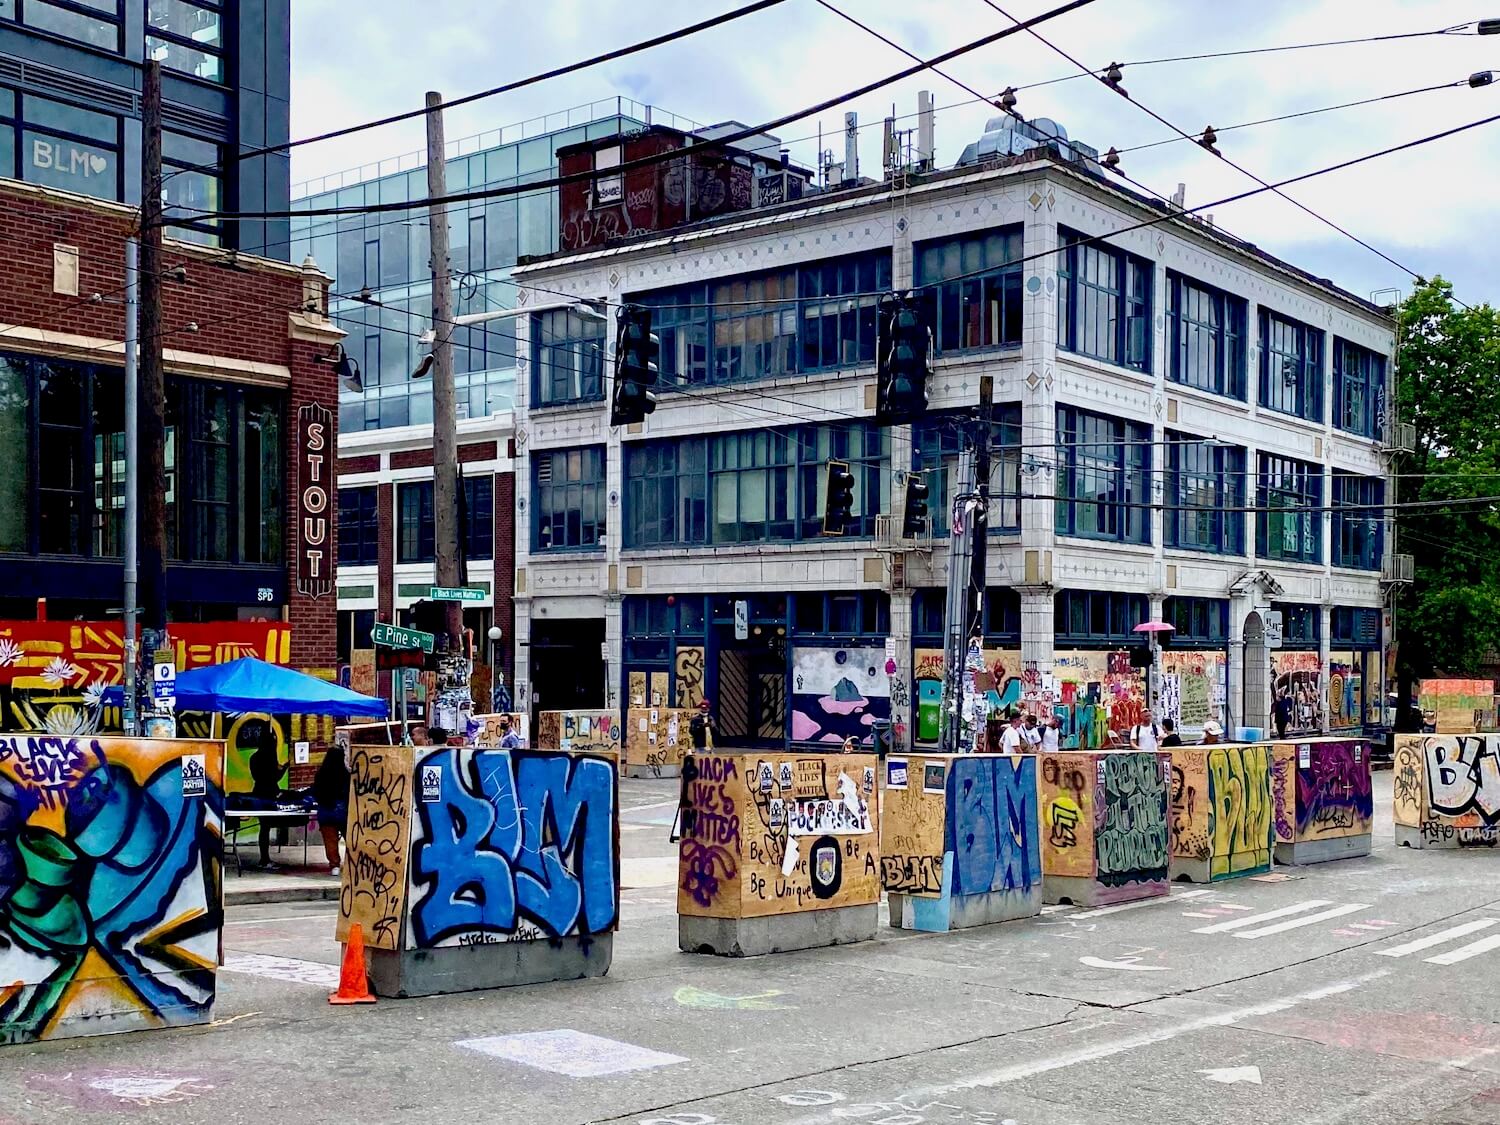 Signage at the CHOP area of Seattle during the Black Lives Matter protest. The concrete traffic barriers are covered with painted plywood depicting many different themes around the Black Lives Matters movement. In the background are multi-story buildings.